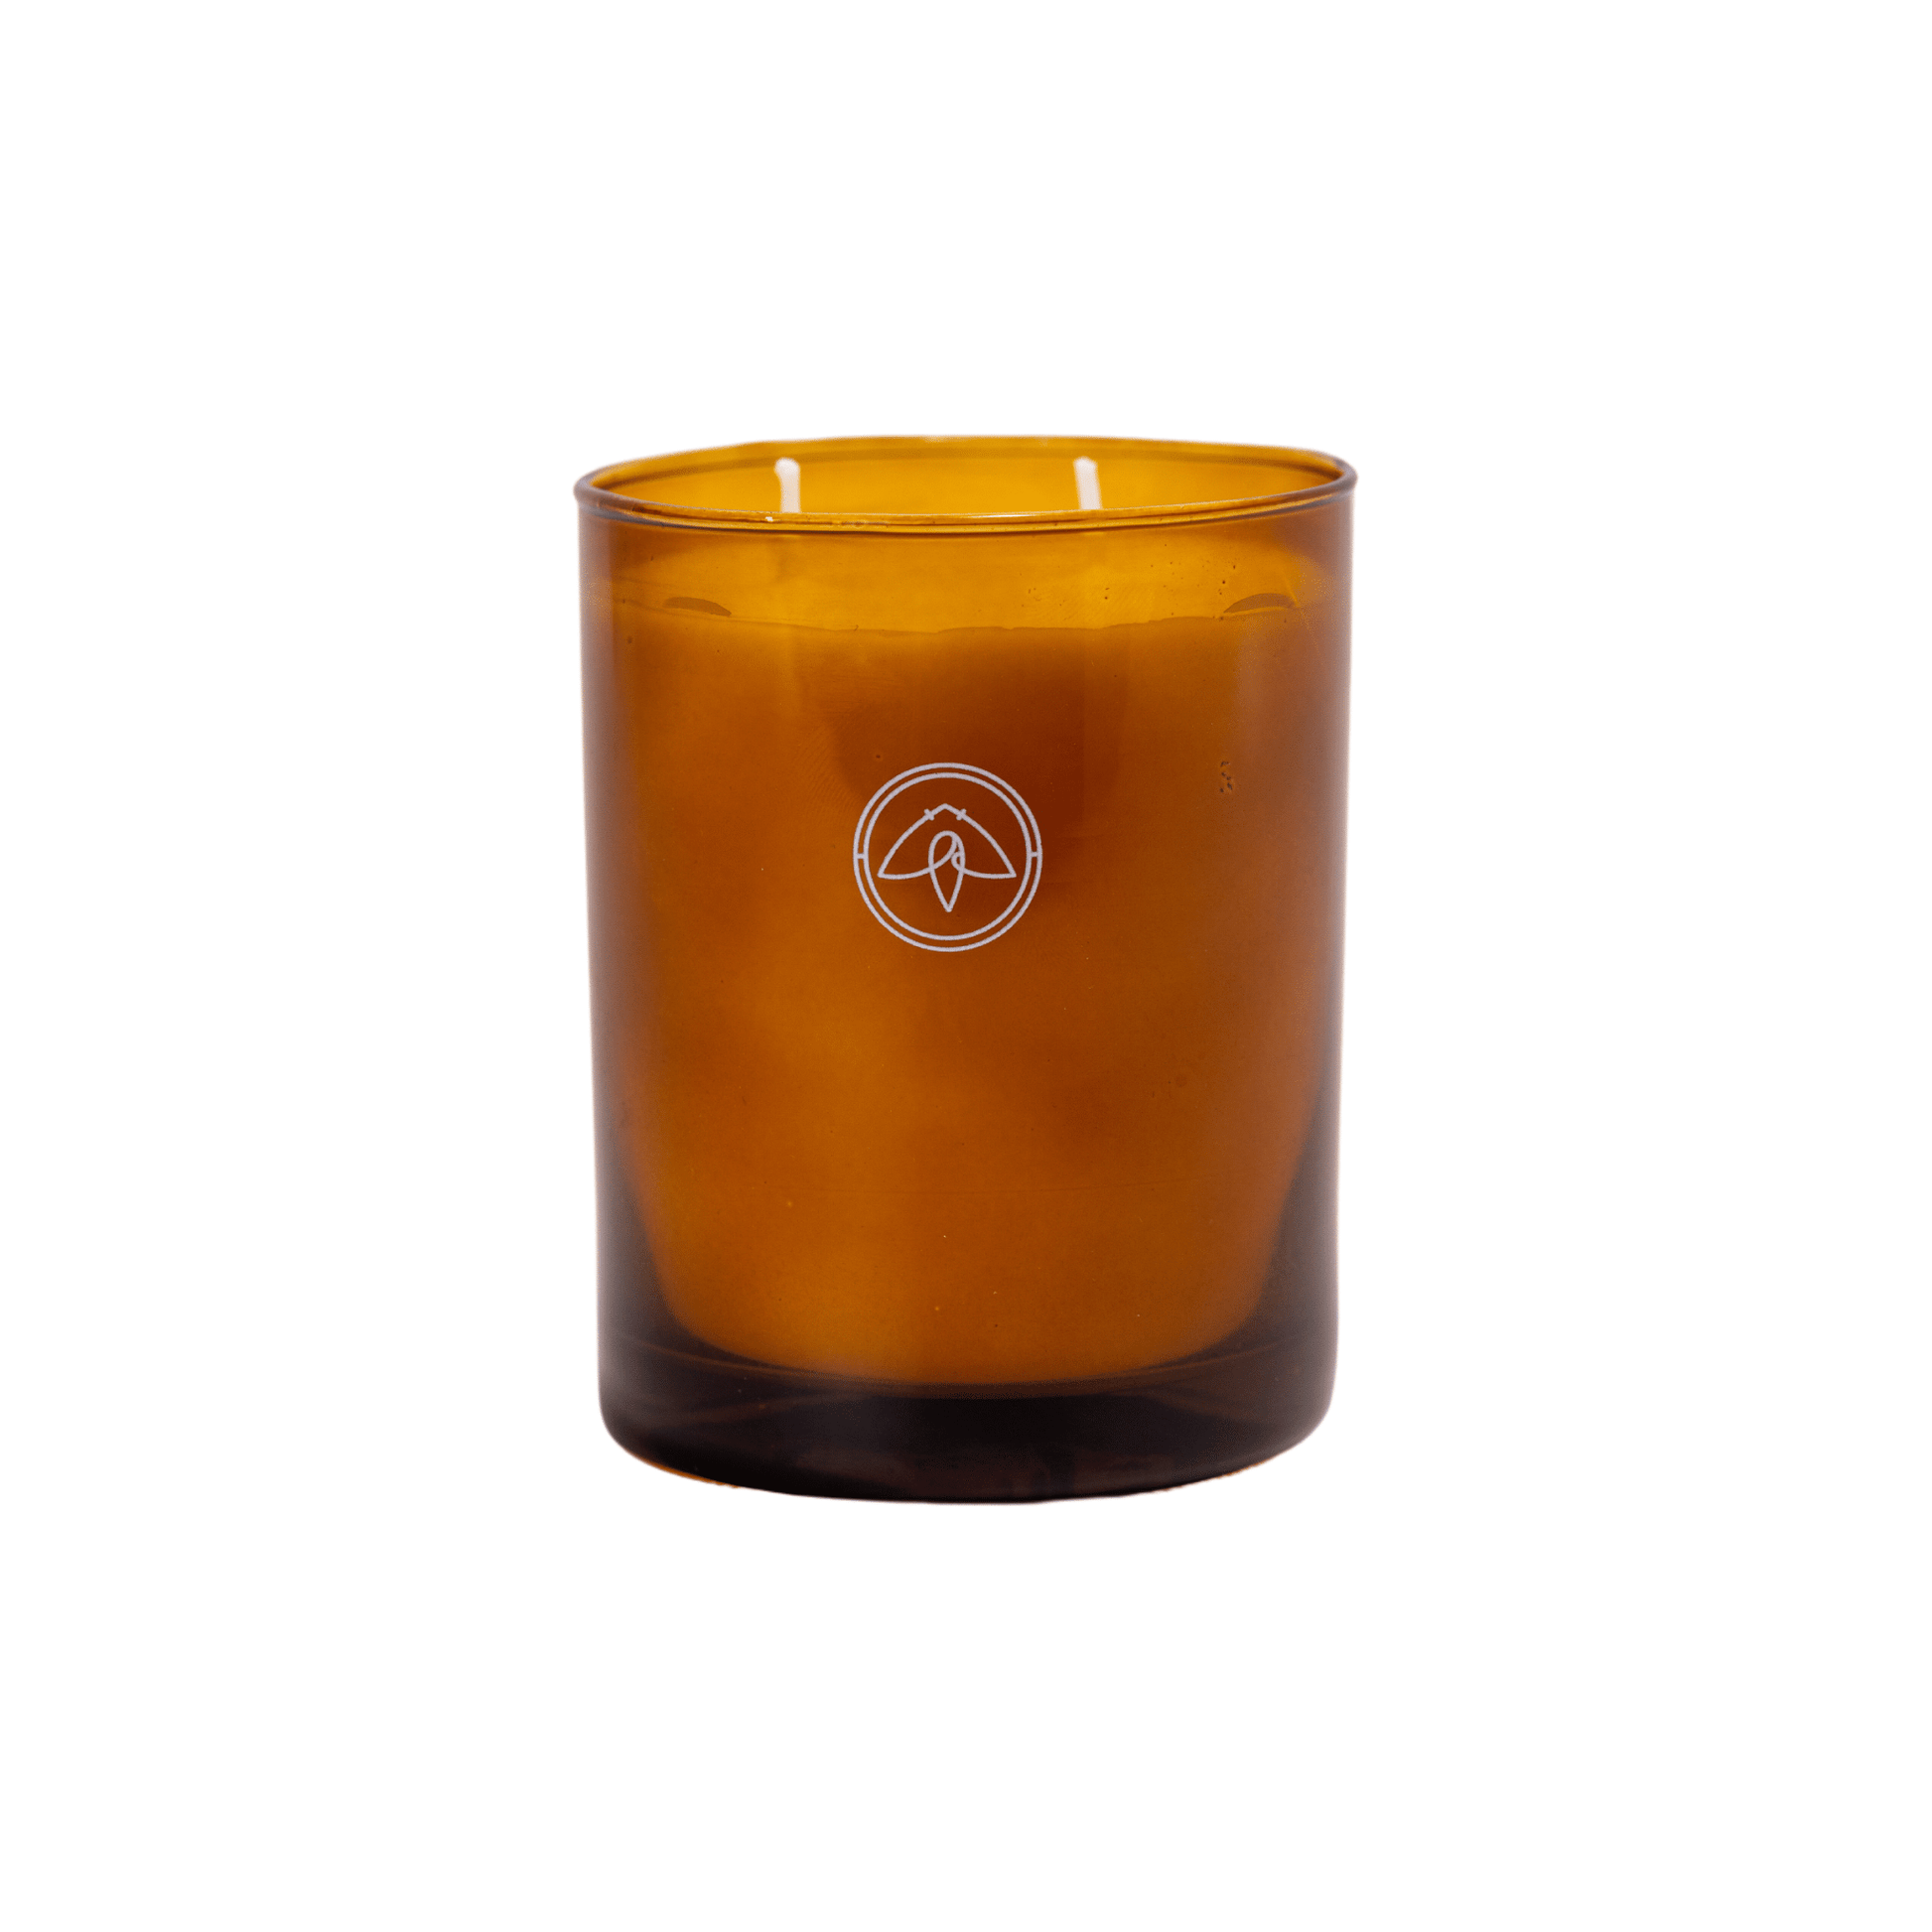 Products Glow 10oz. Candle - Vintage Leather unlit two wick candle on white background